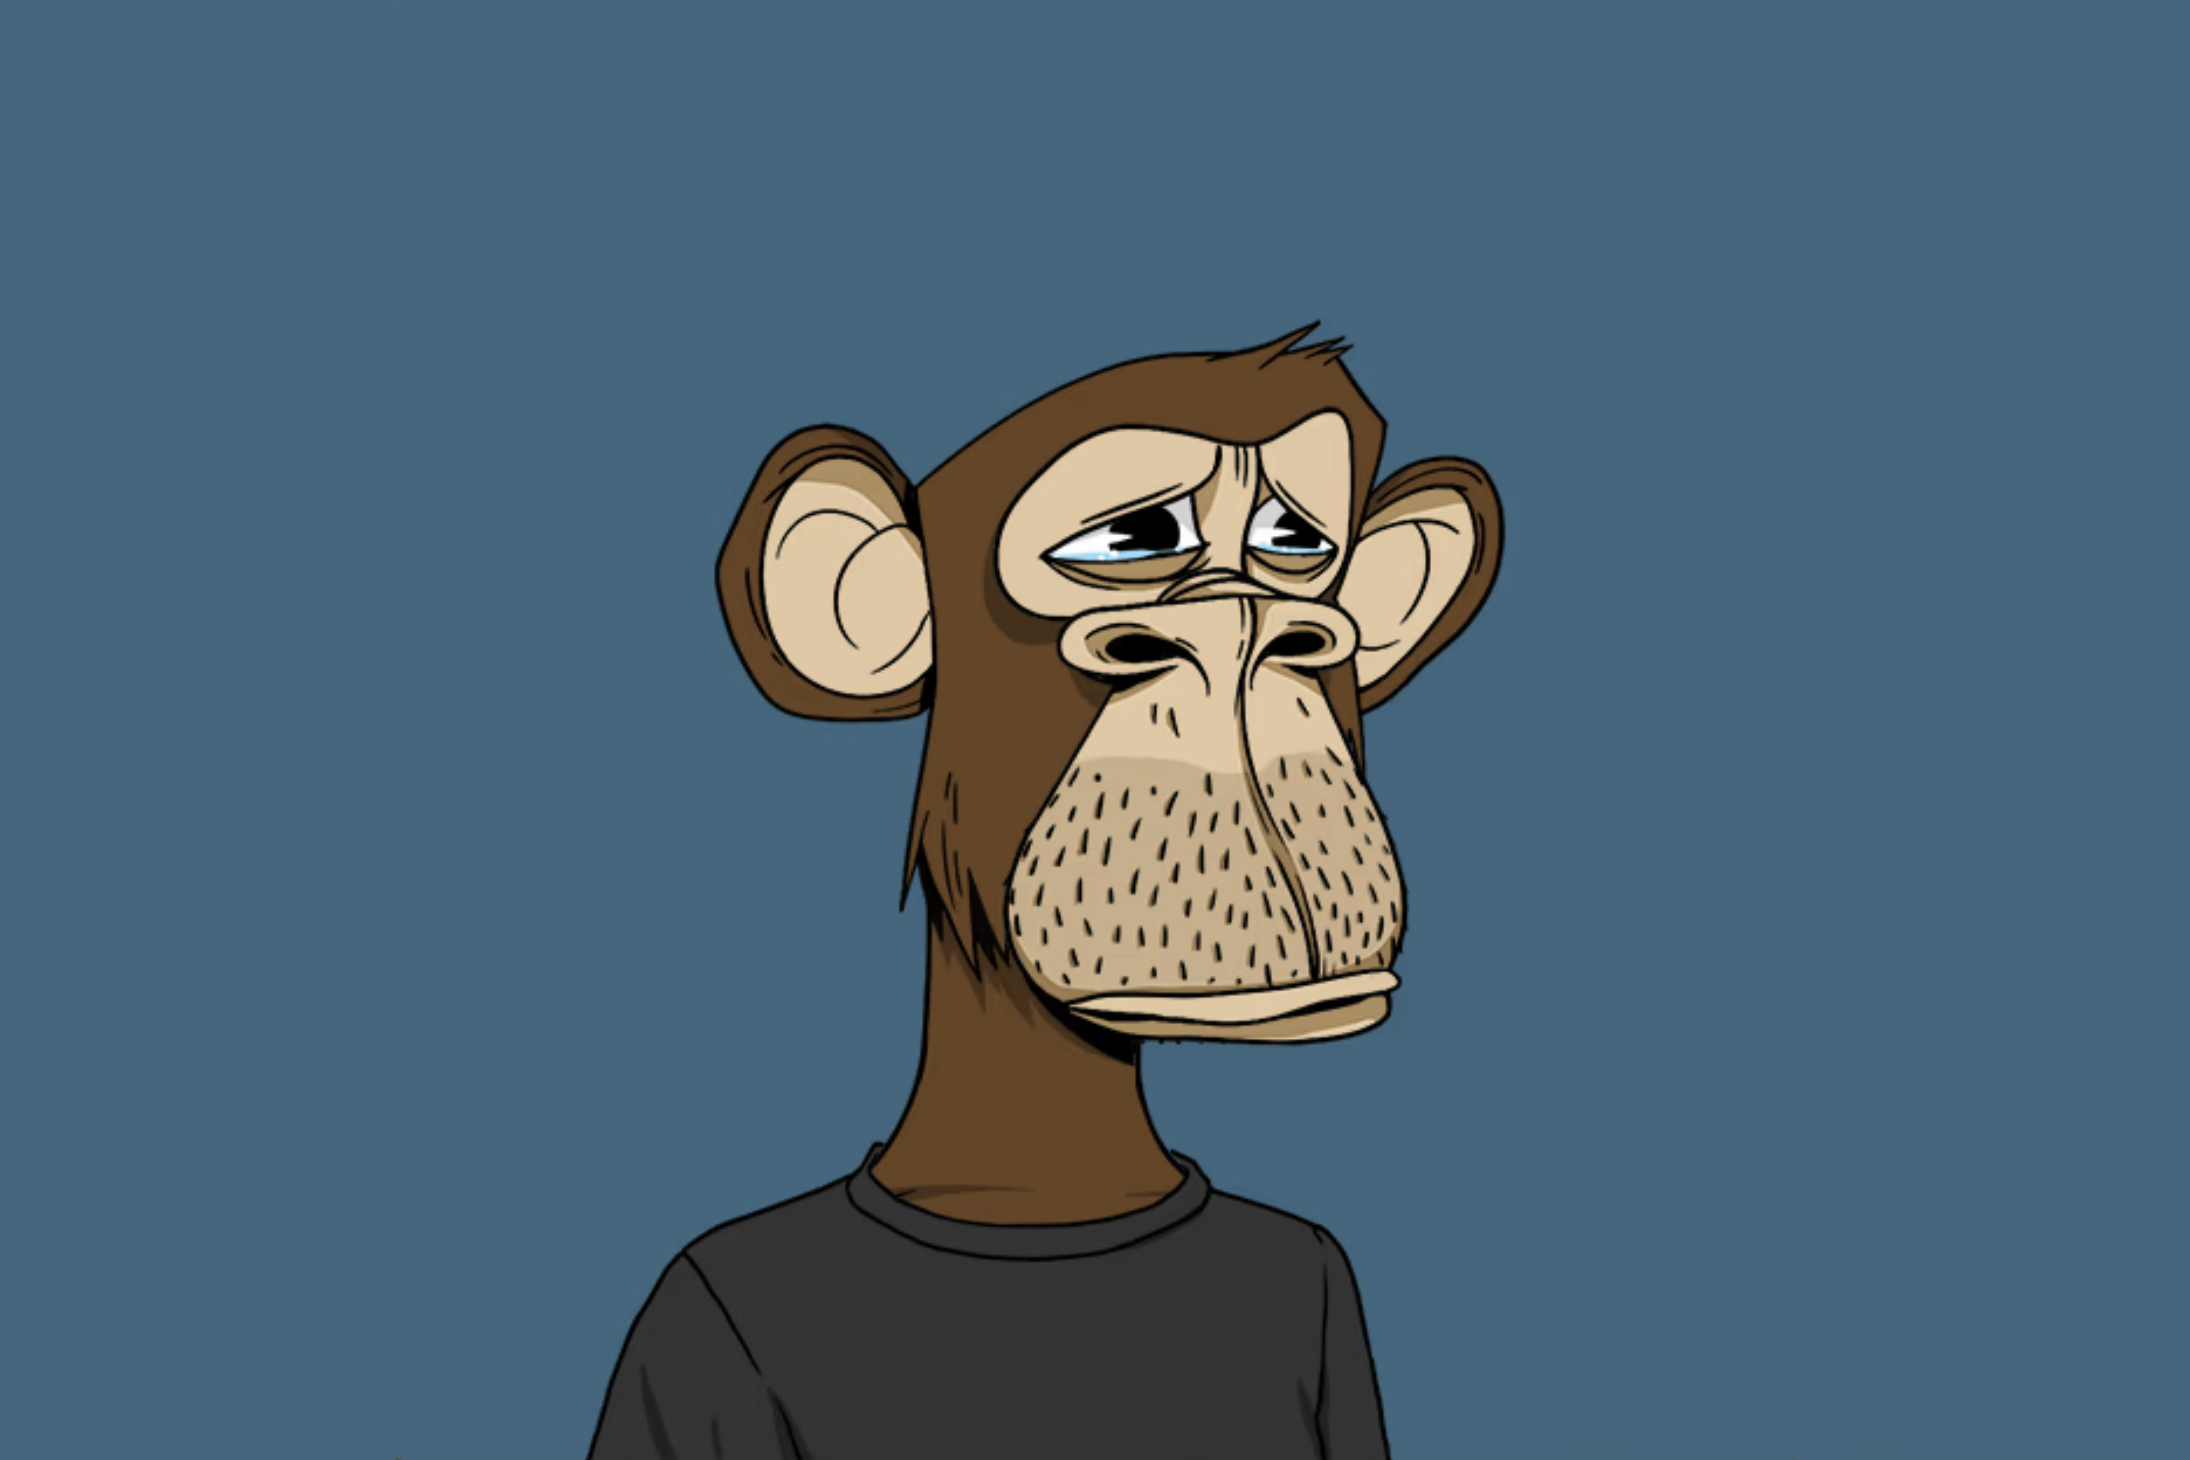 Bored Ape #3001 (OpenSea, modified by CoinDesk)